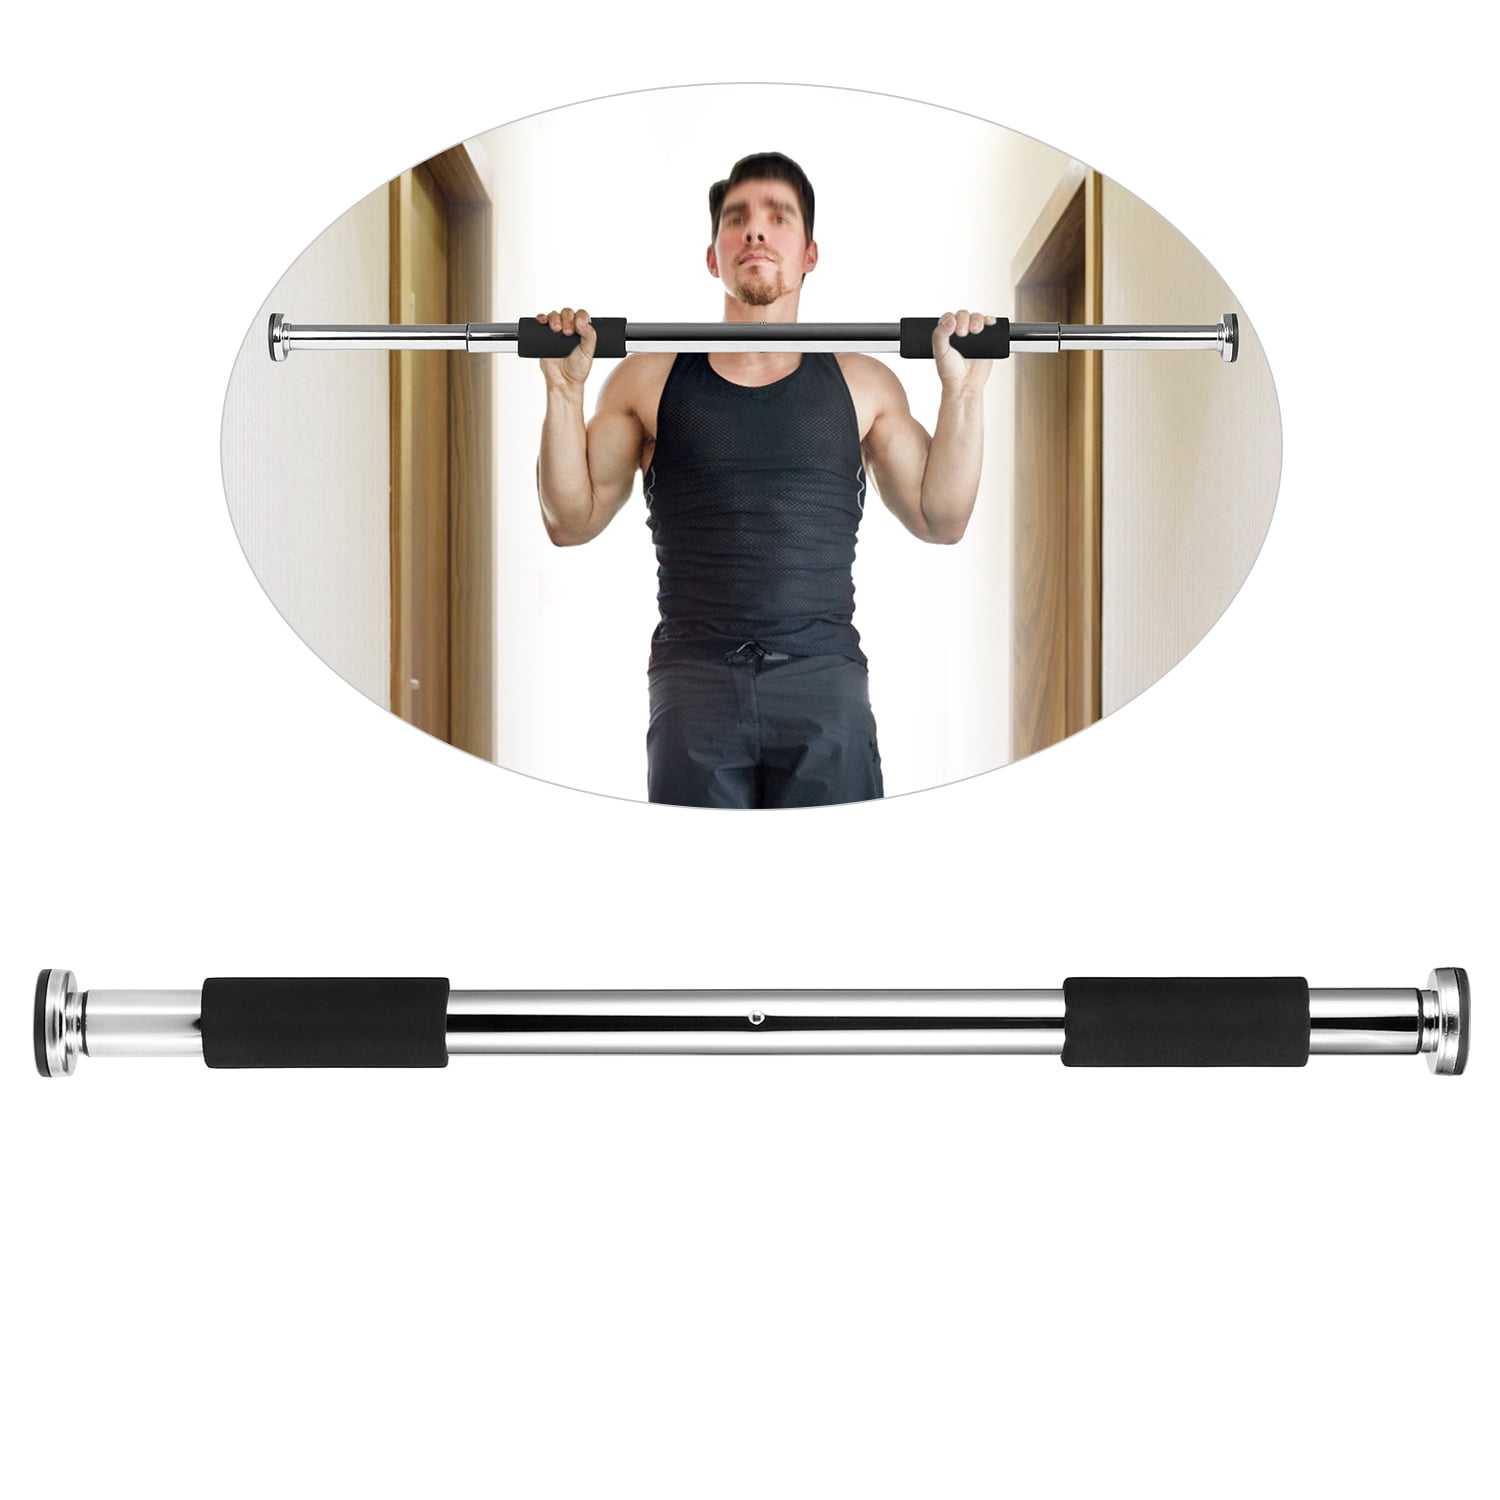 Adjustable Doorway Pull Up Bar Way Chin Up Horizontal Home Gym Exercise Fitness Workout Equipment 350LB Bearing | Canada